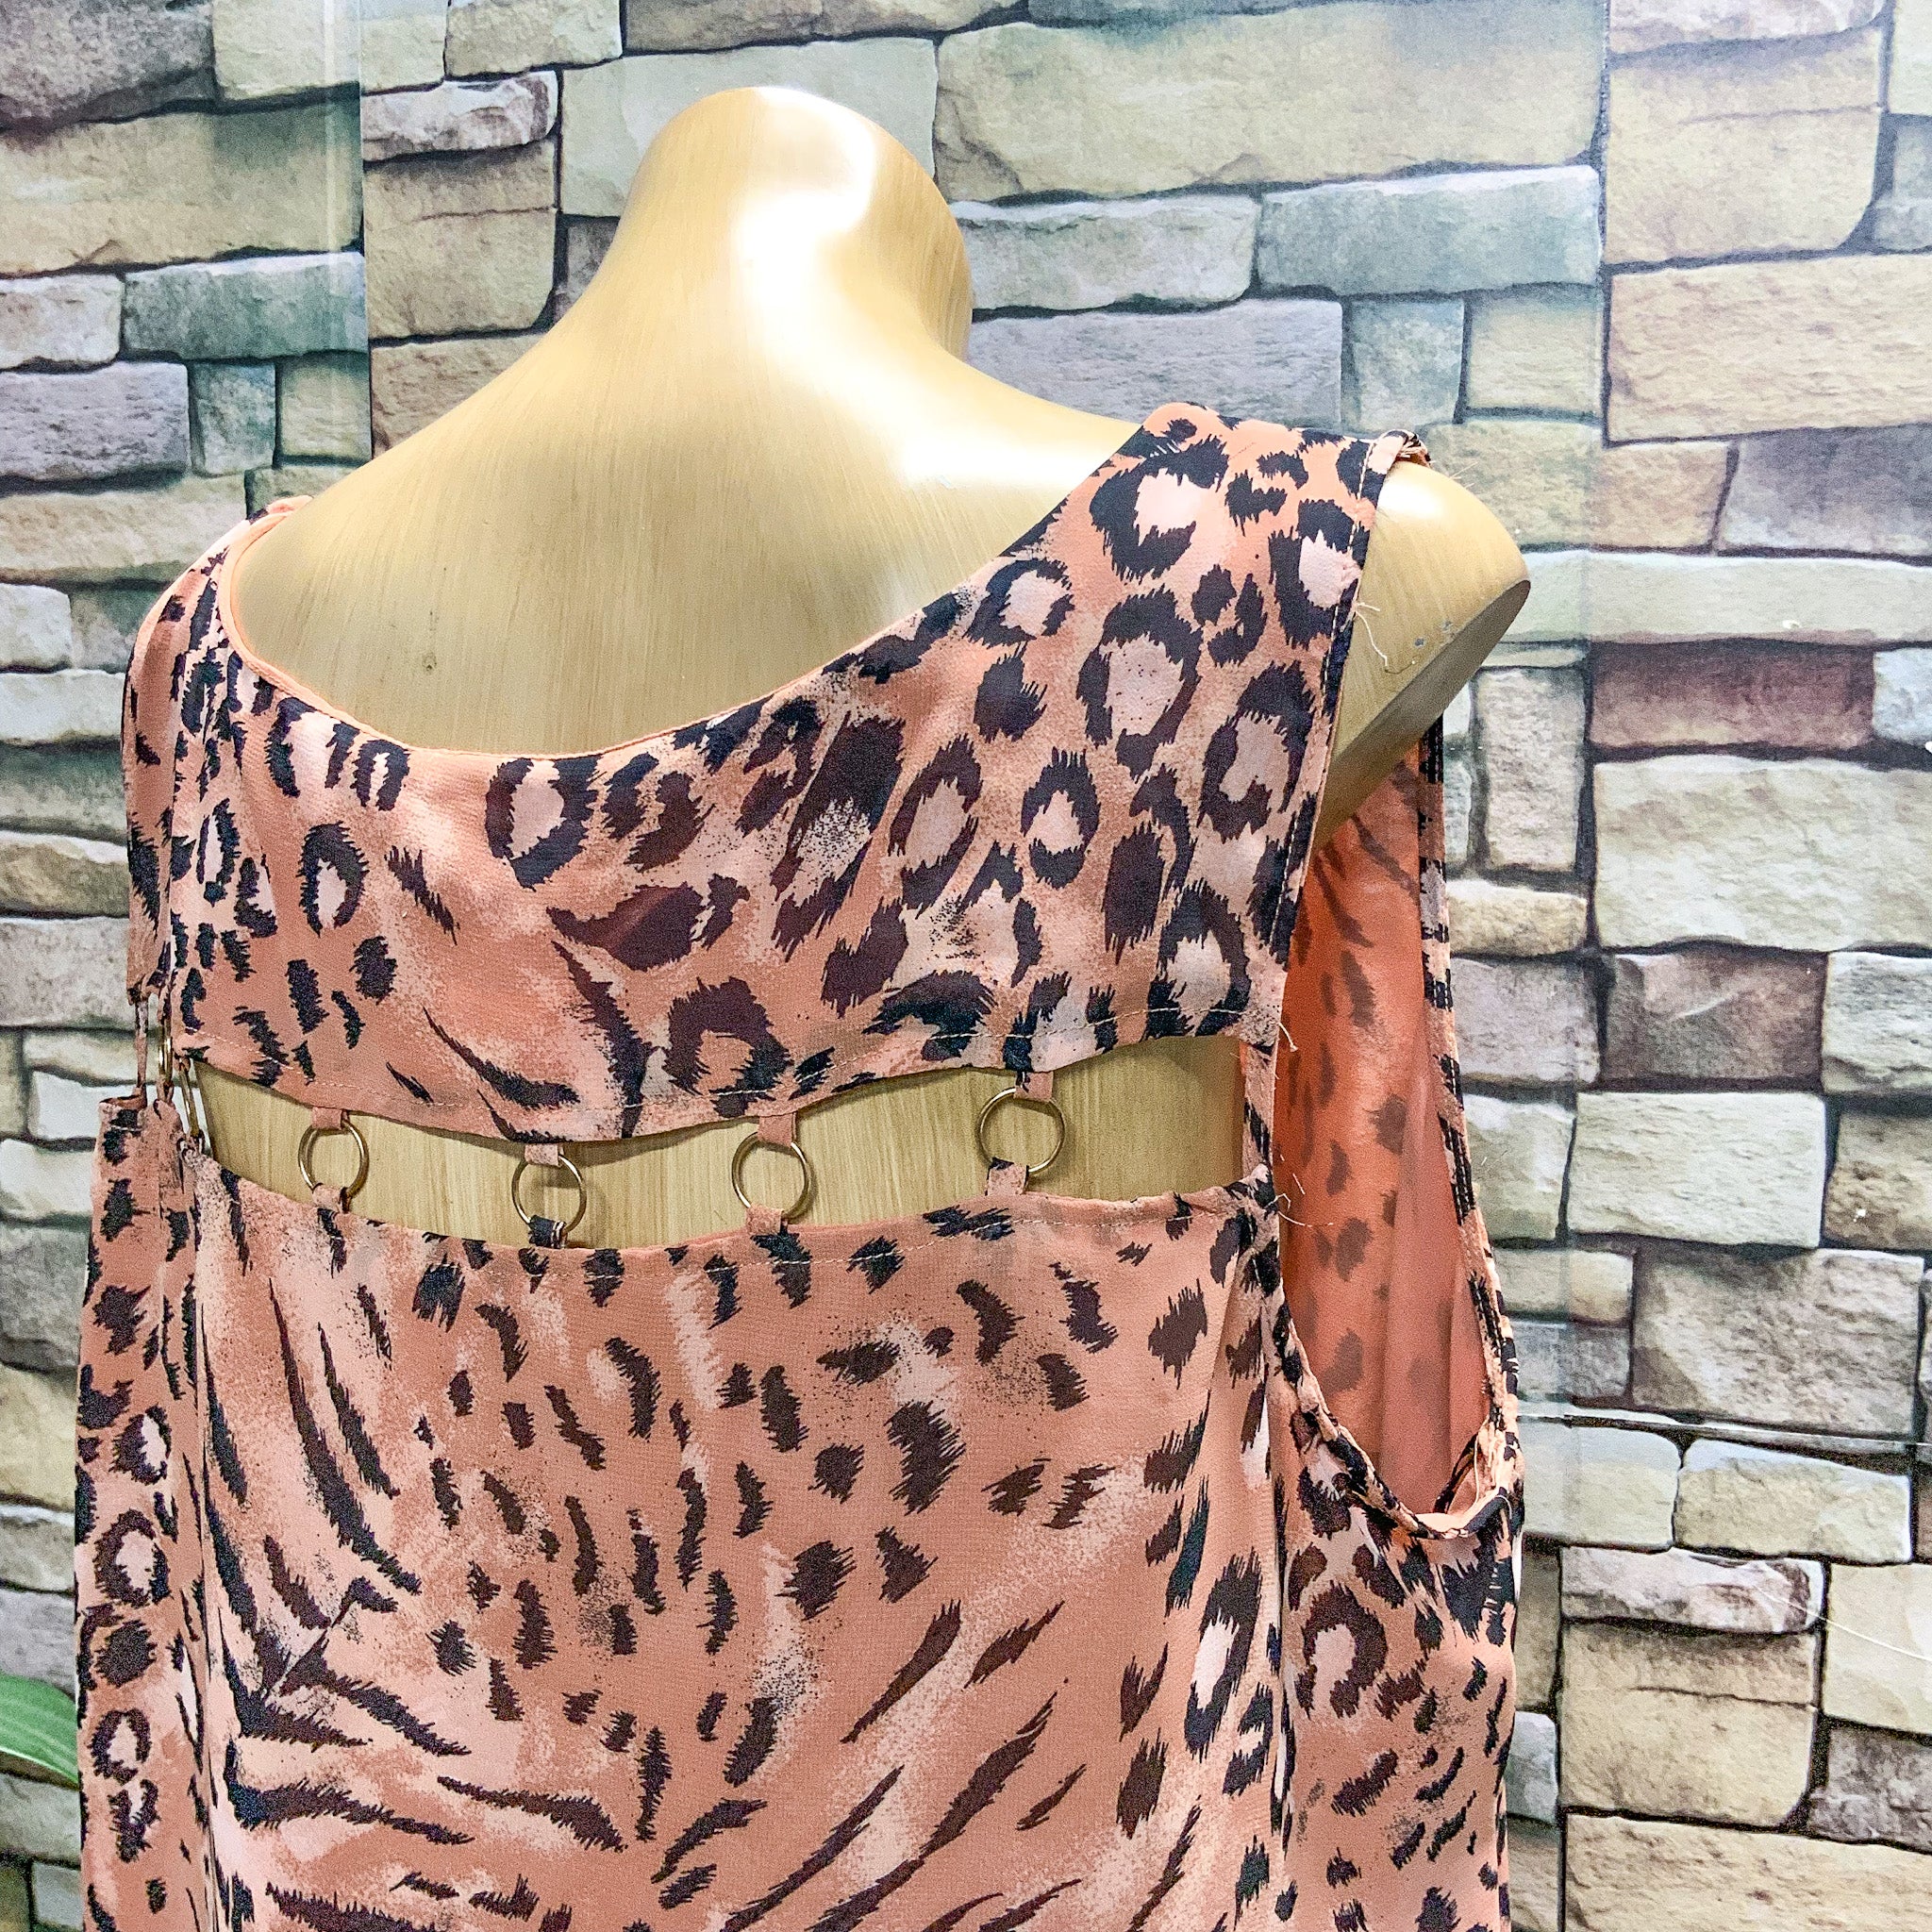 TABLE EIGHT Animal Print Sleeveless Chain Detail Top - size 16